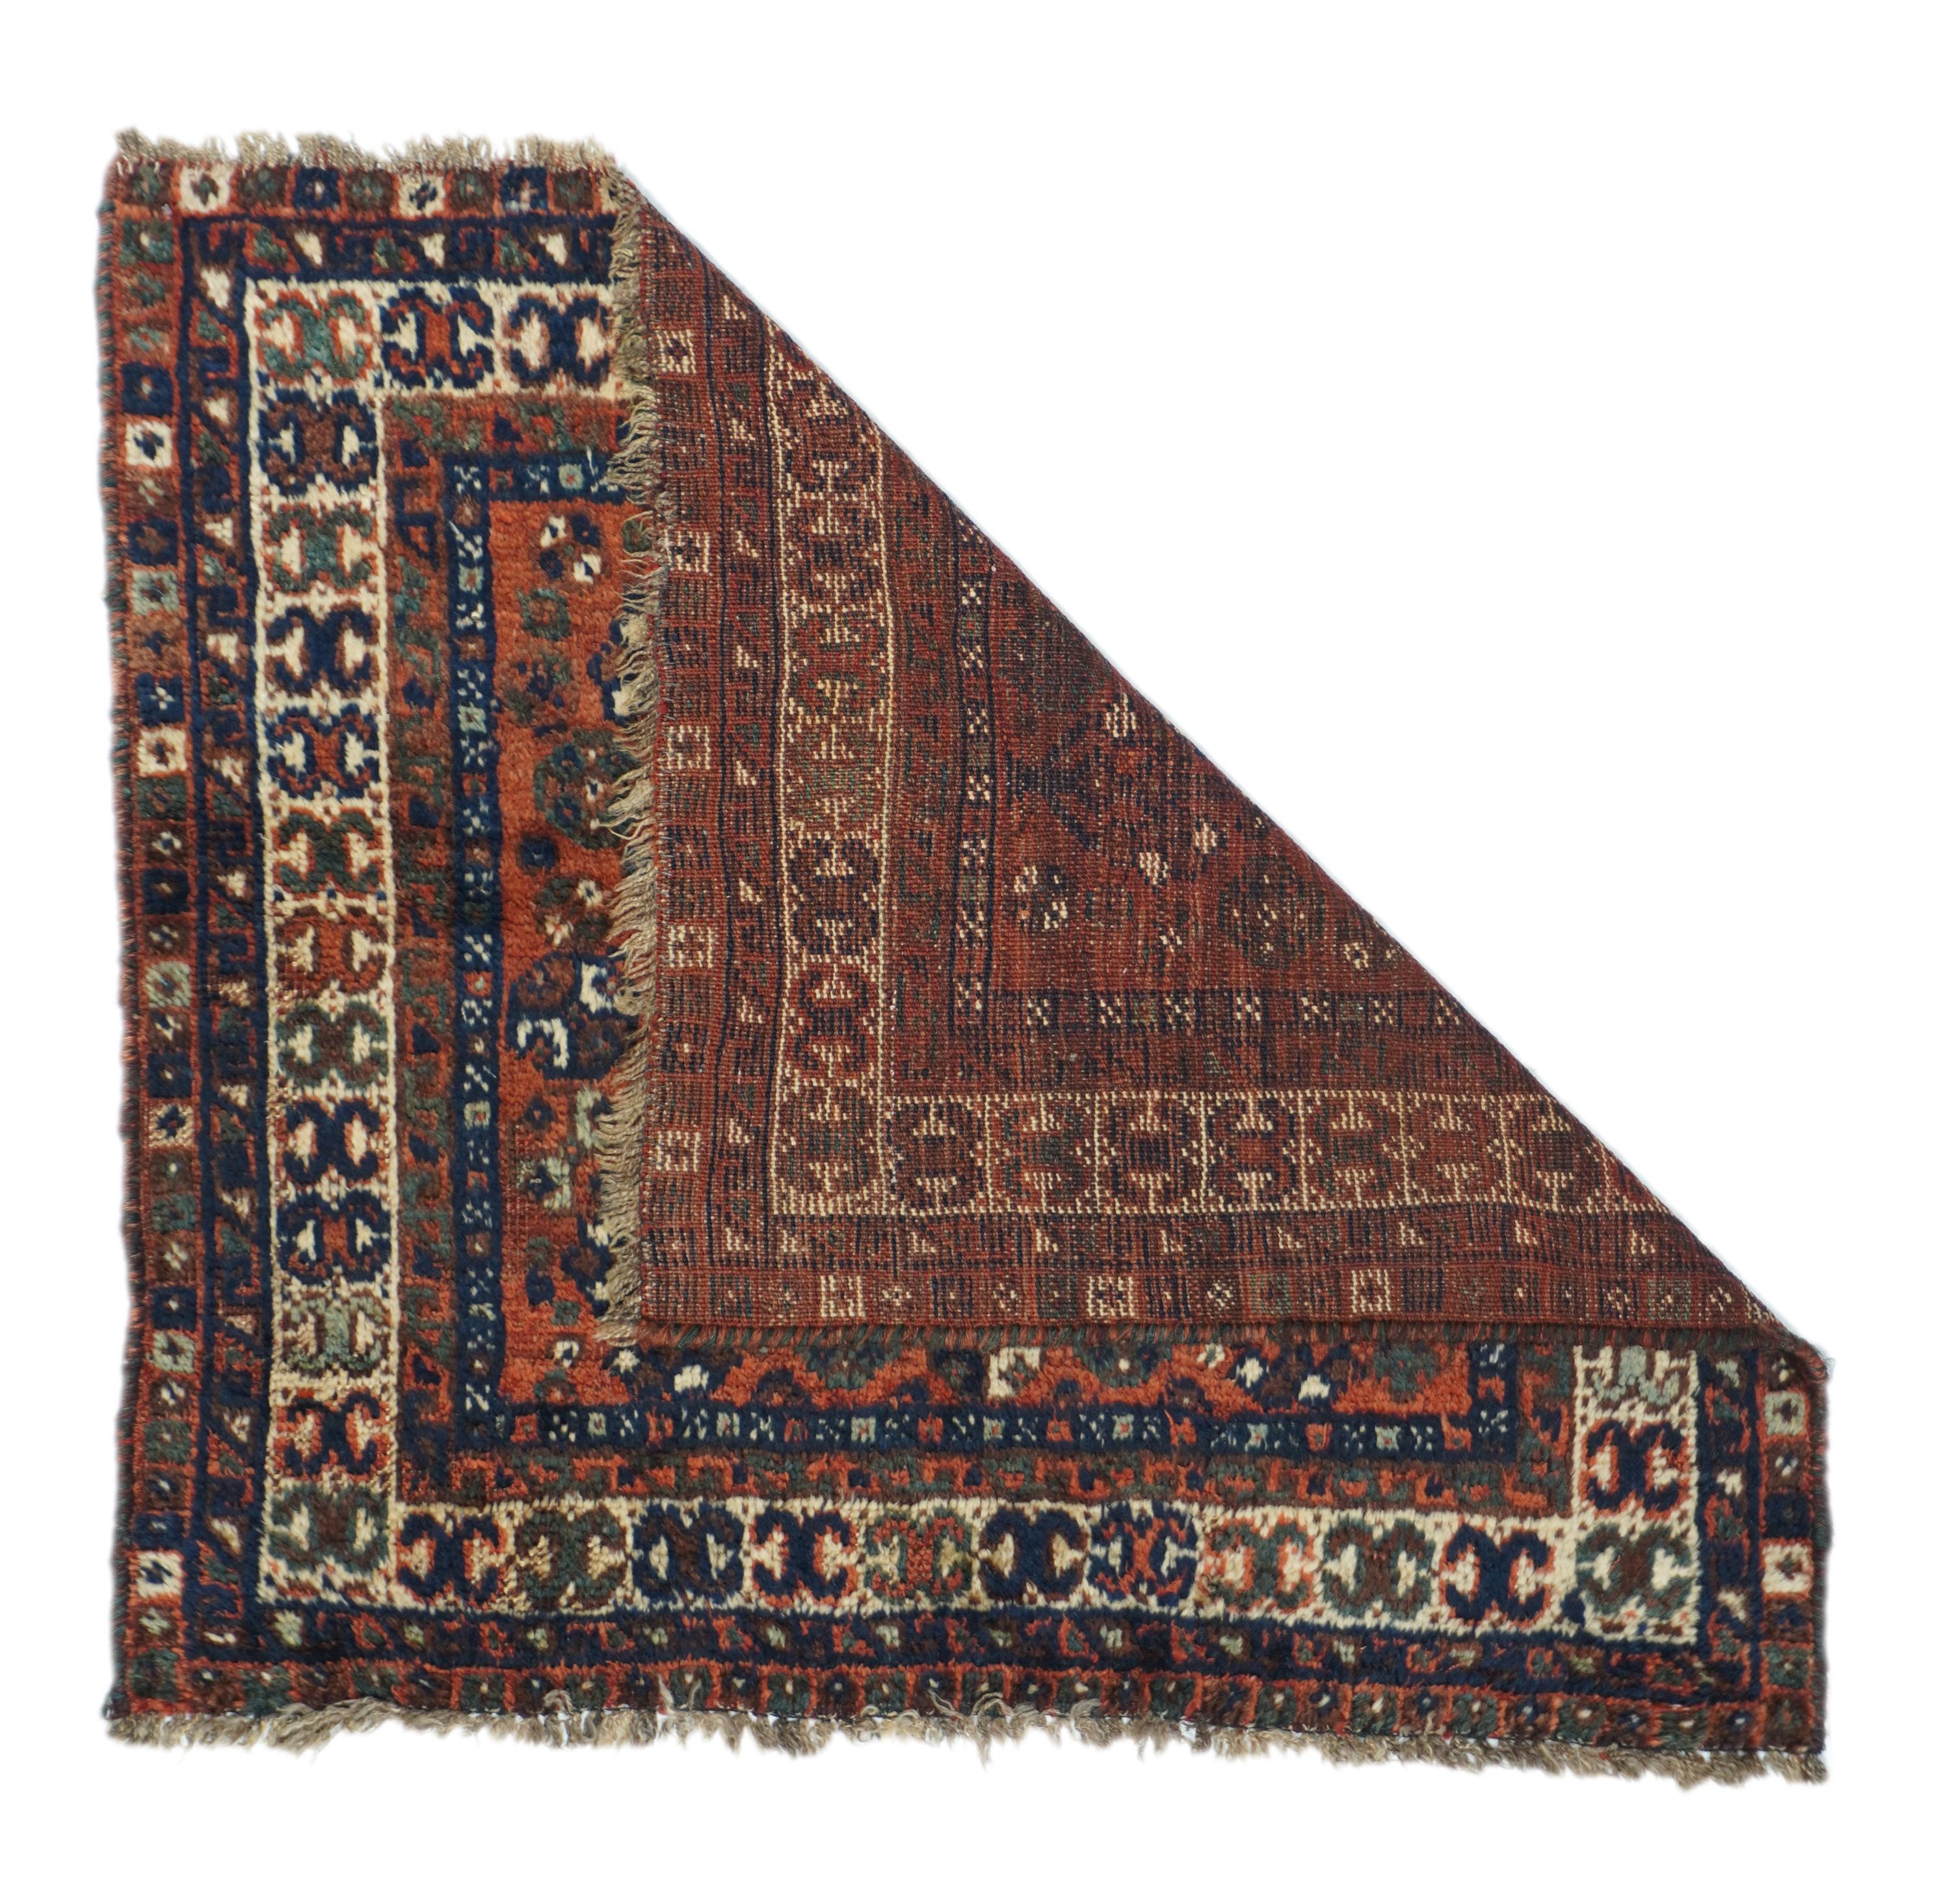 Antique Shiraz Rug 2'9'' x 3'1''. Or a giant bag-face. Red field with stepped octagonal navy medallion centralized by a stylized palmette cross. Navy-accented flowers and rosettes in the field. Ivory border with X curled at tips. Wool foundation,